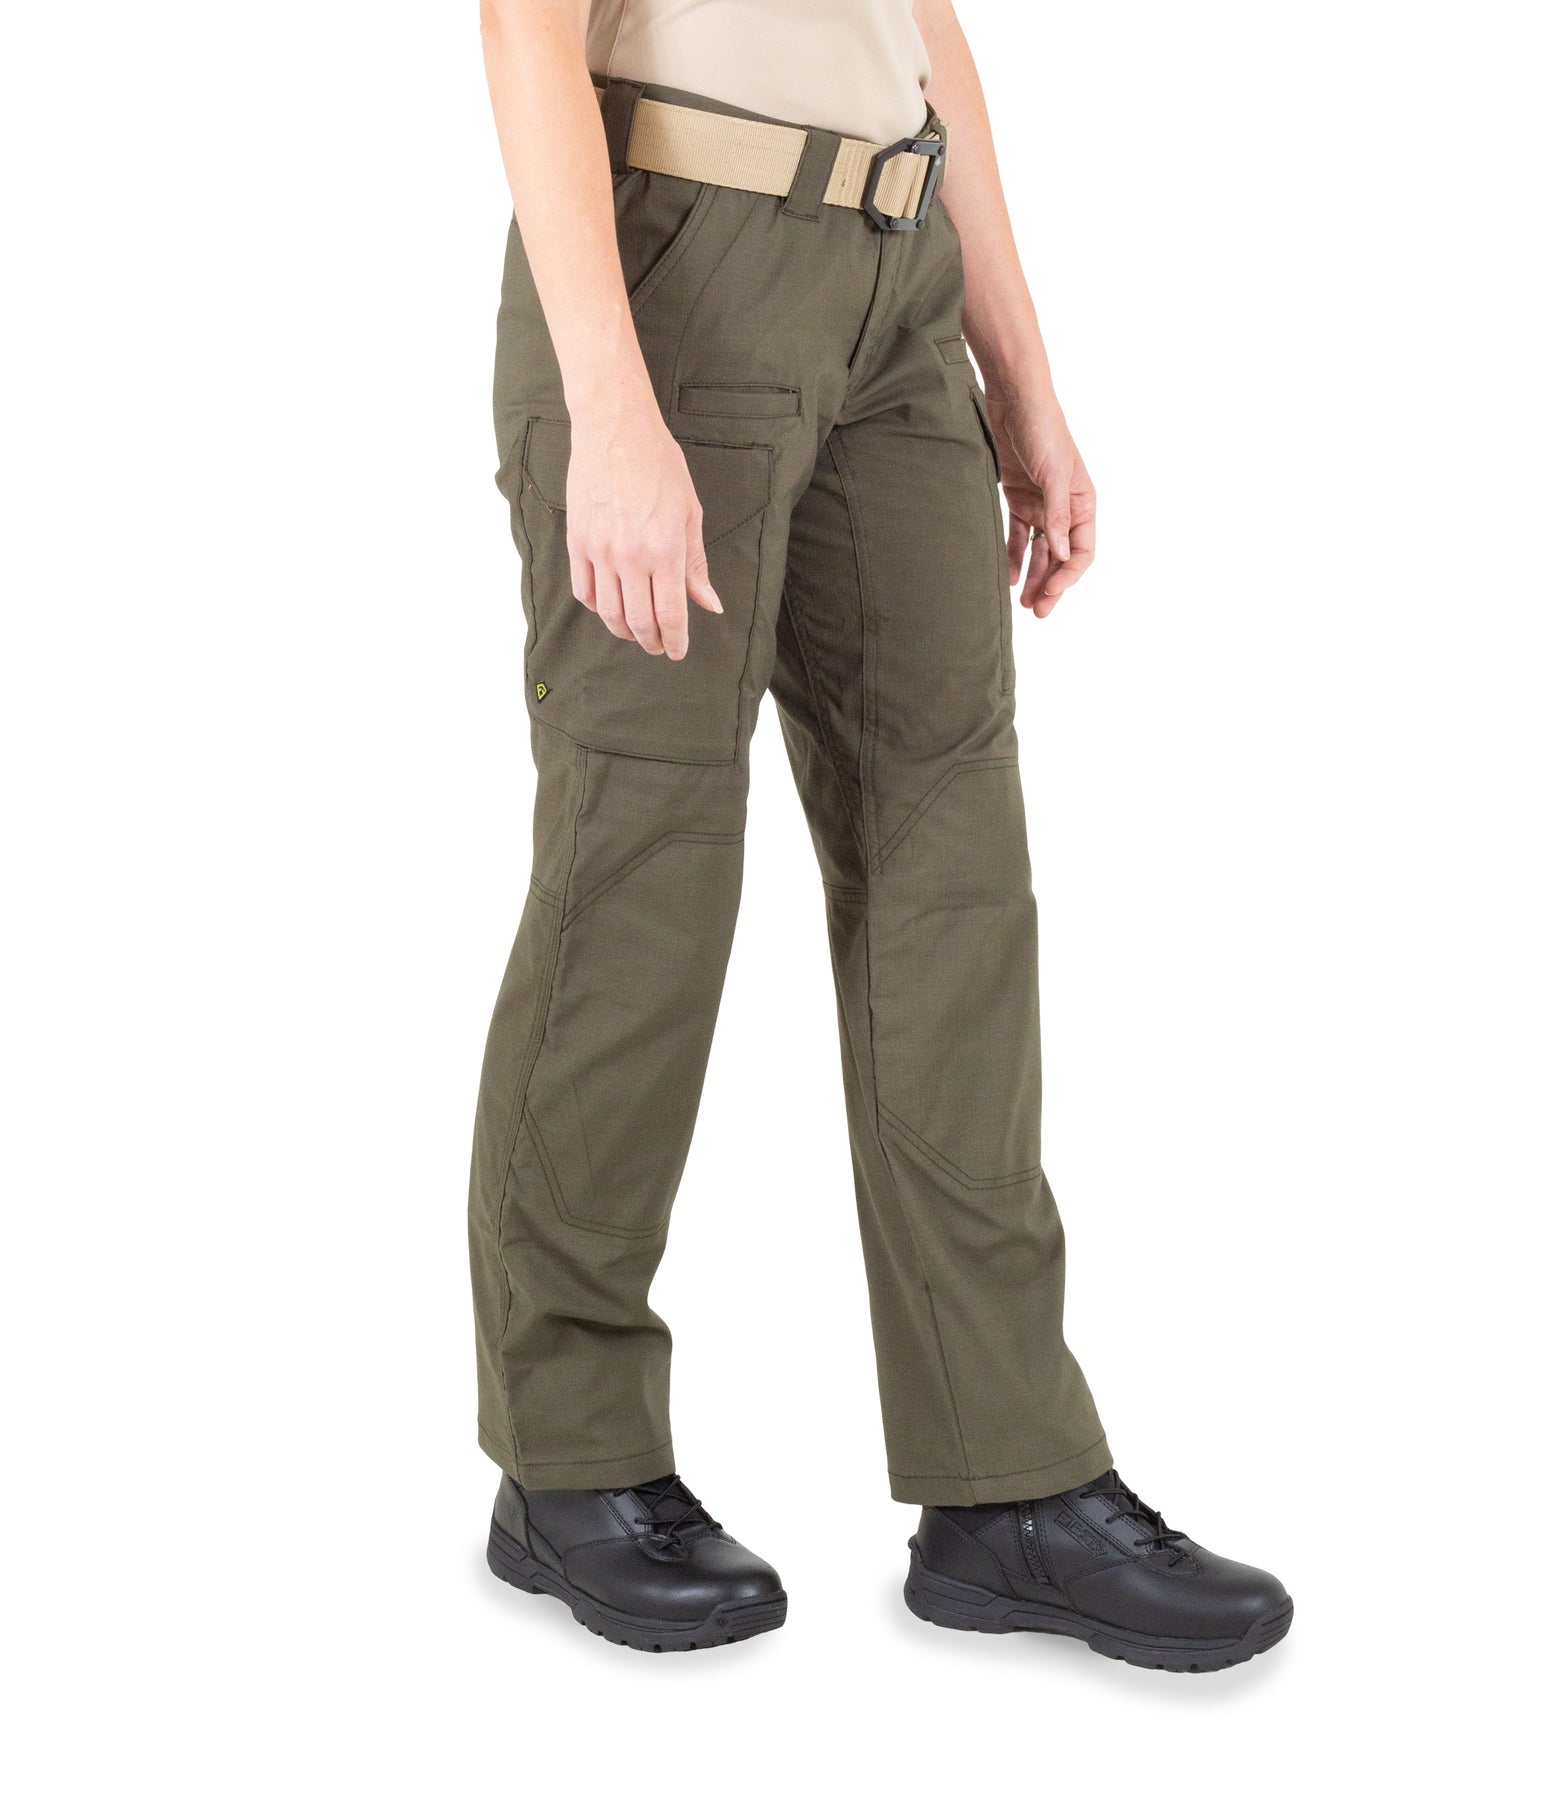 Women's V2 Tactical Pants / OD Green – First Tactical